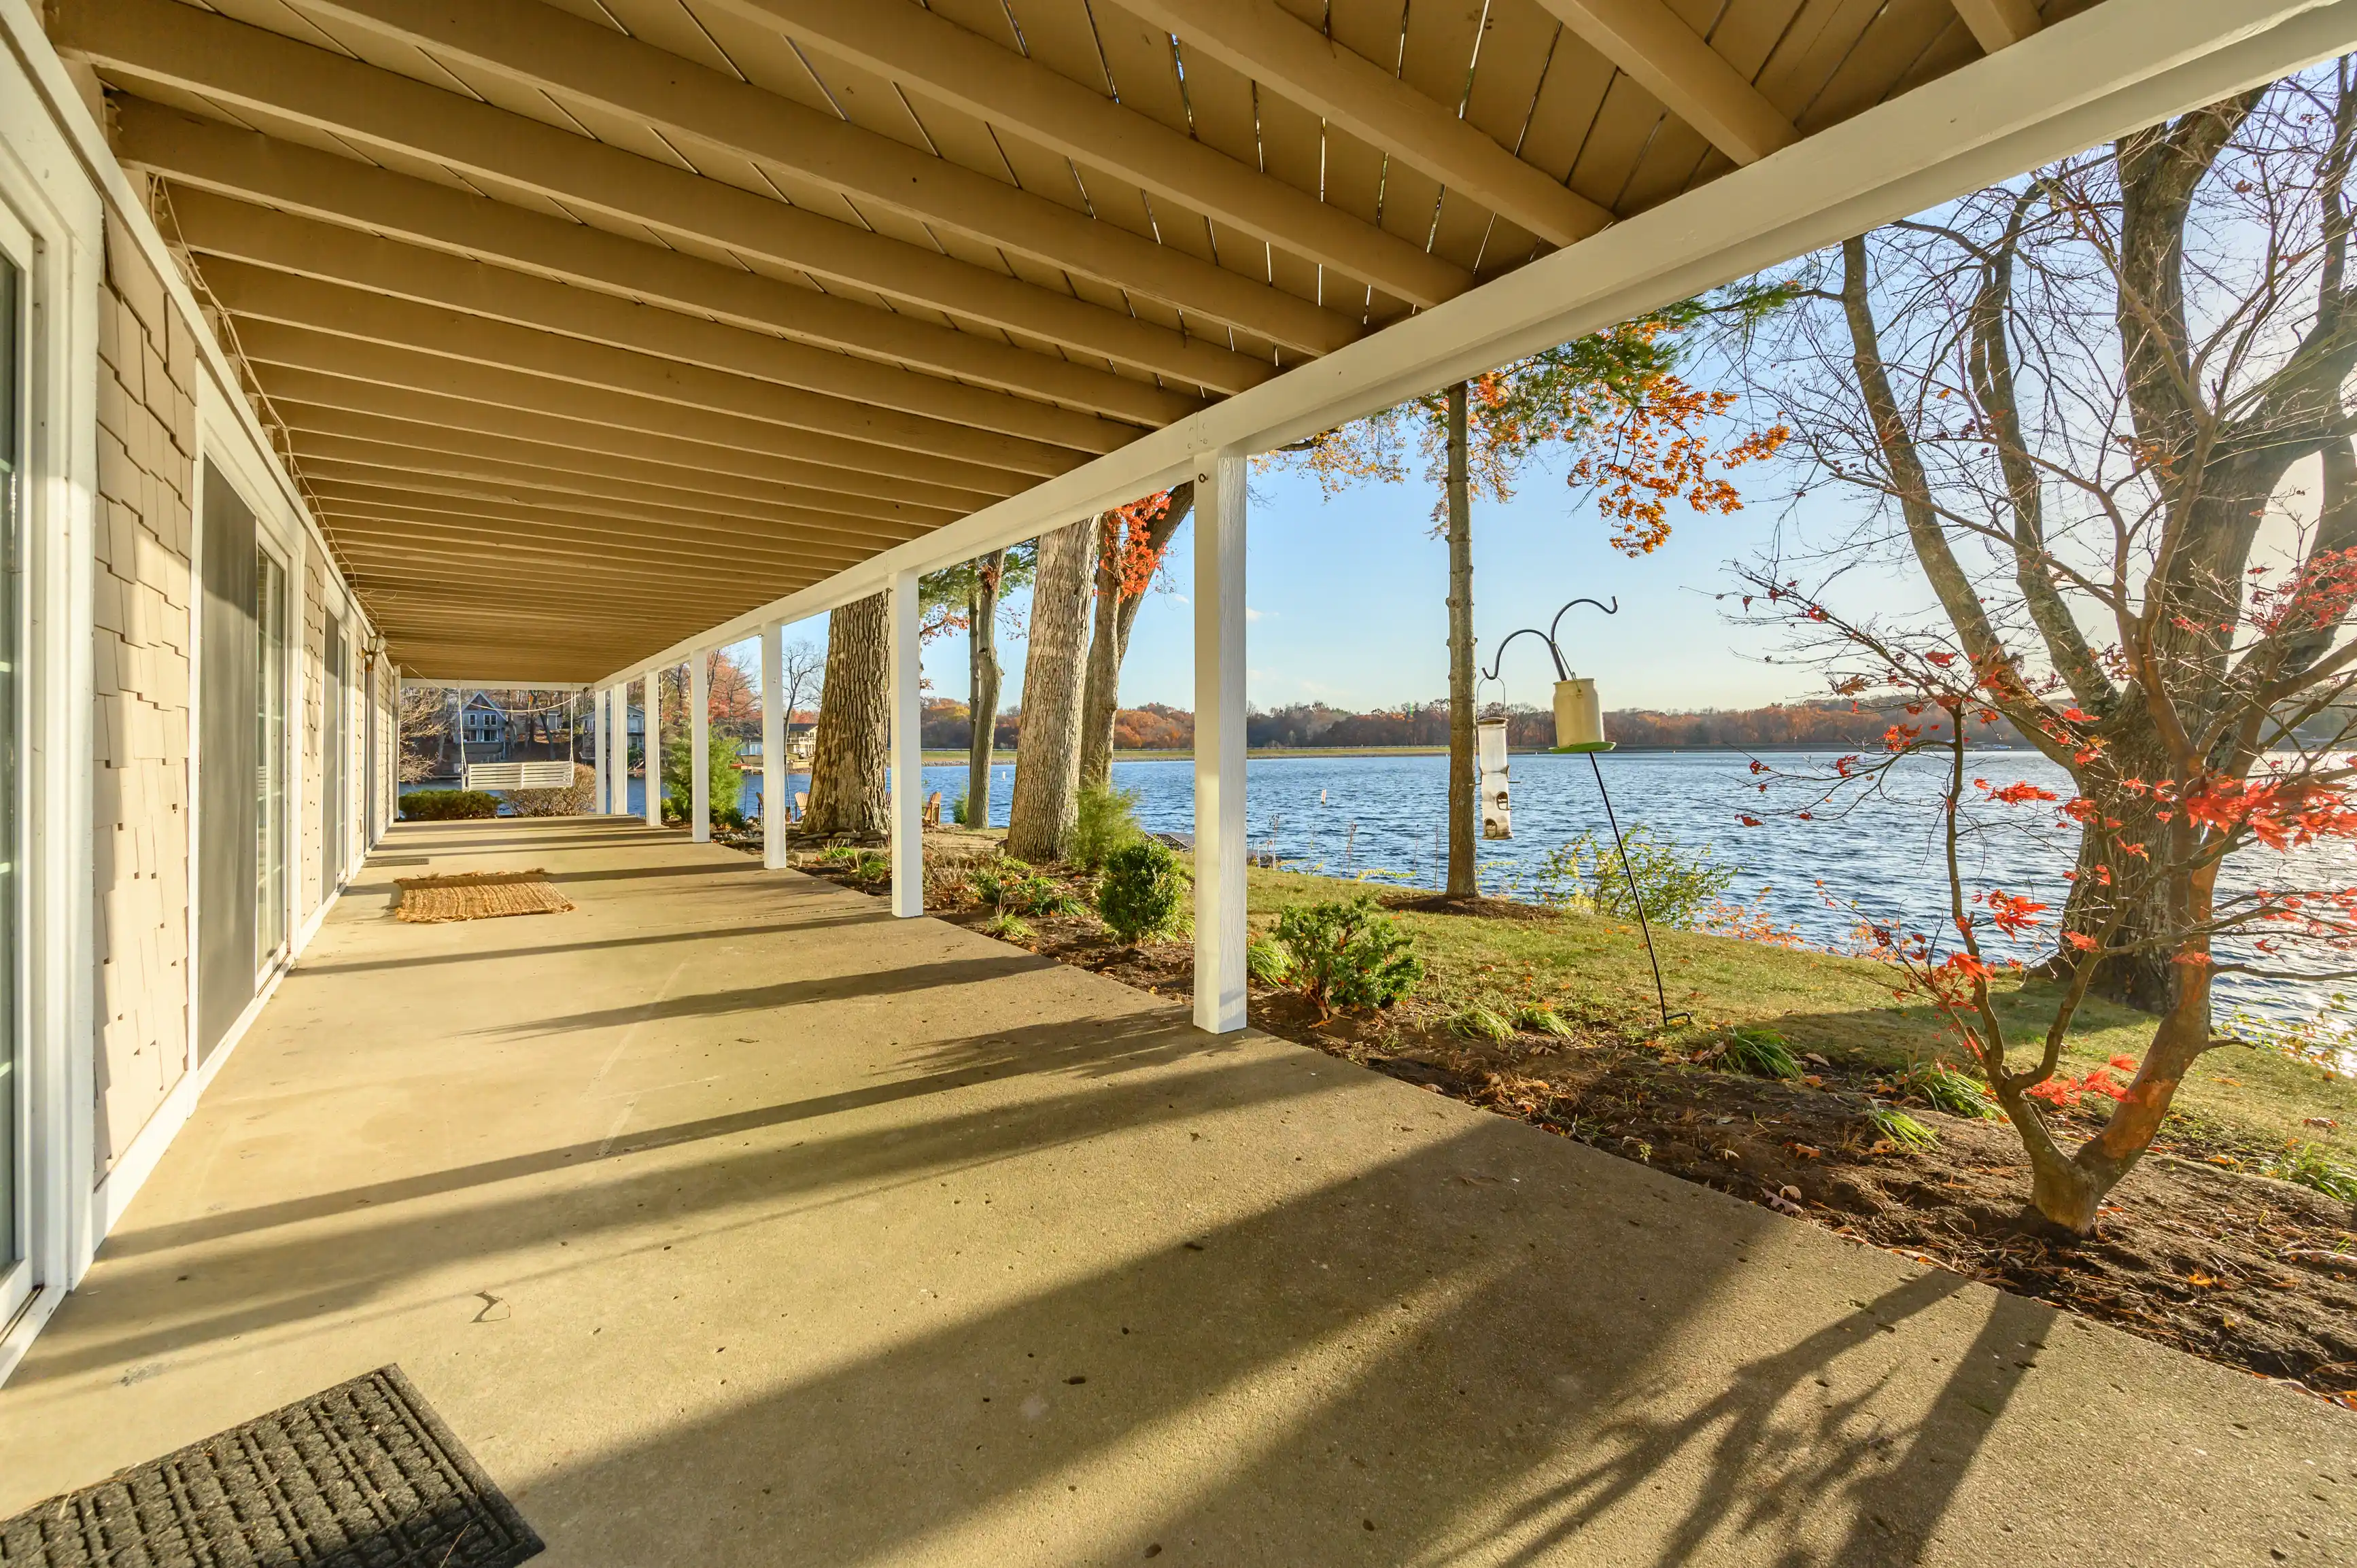 Covered porch of a lakeside house with white pillars, leaf-bearing trees, and a clear view of the lake under a sunny sky.